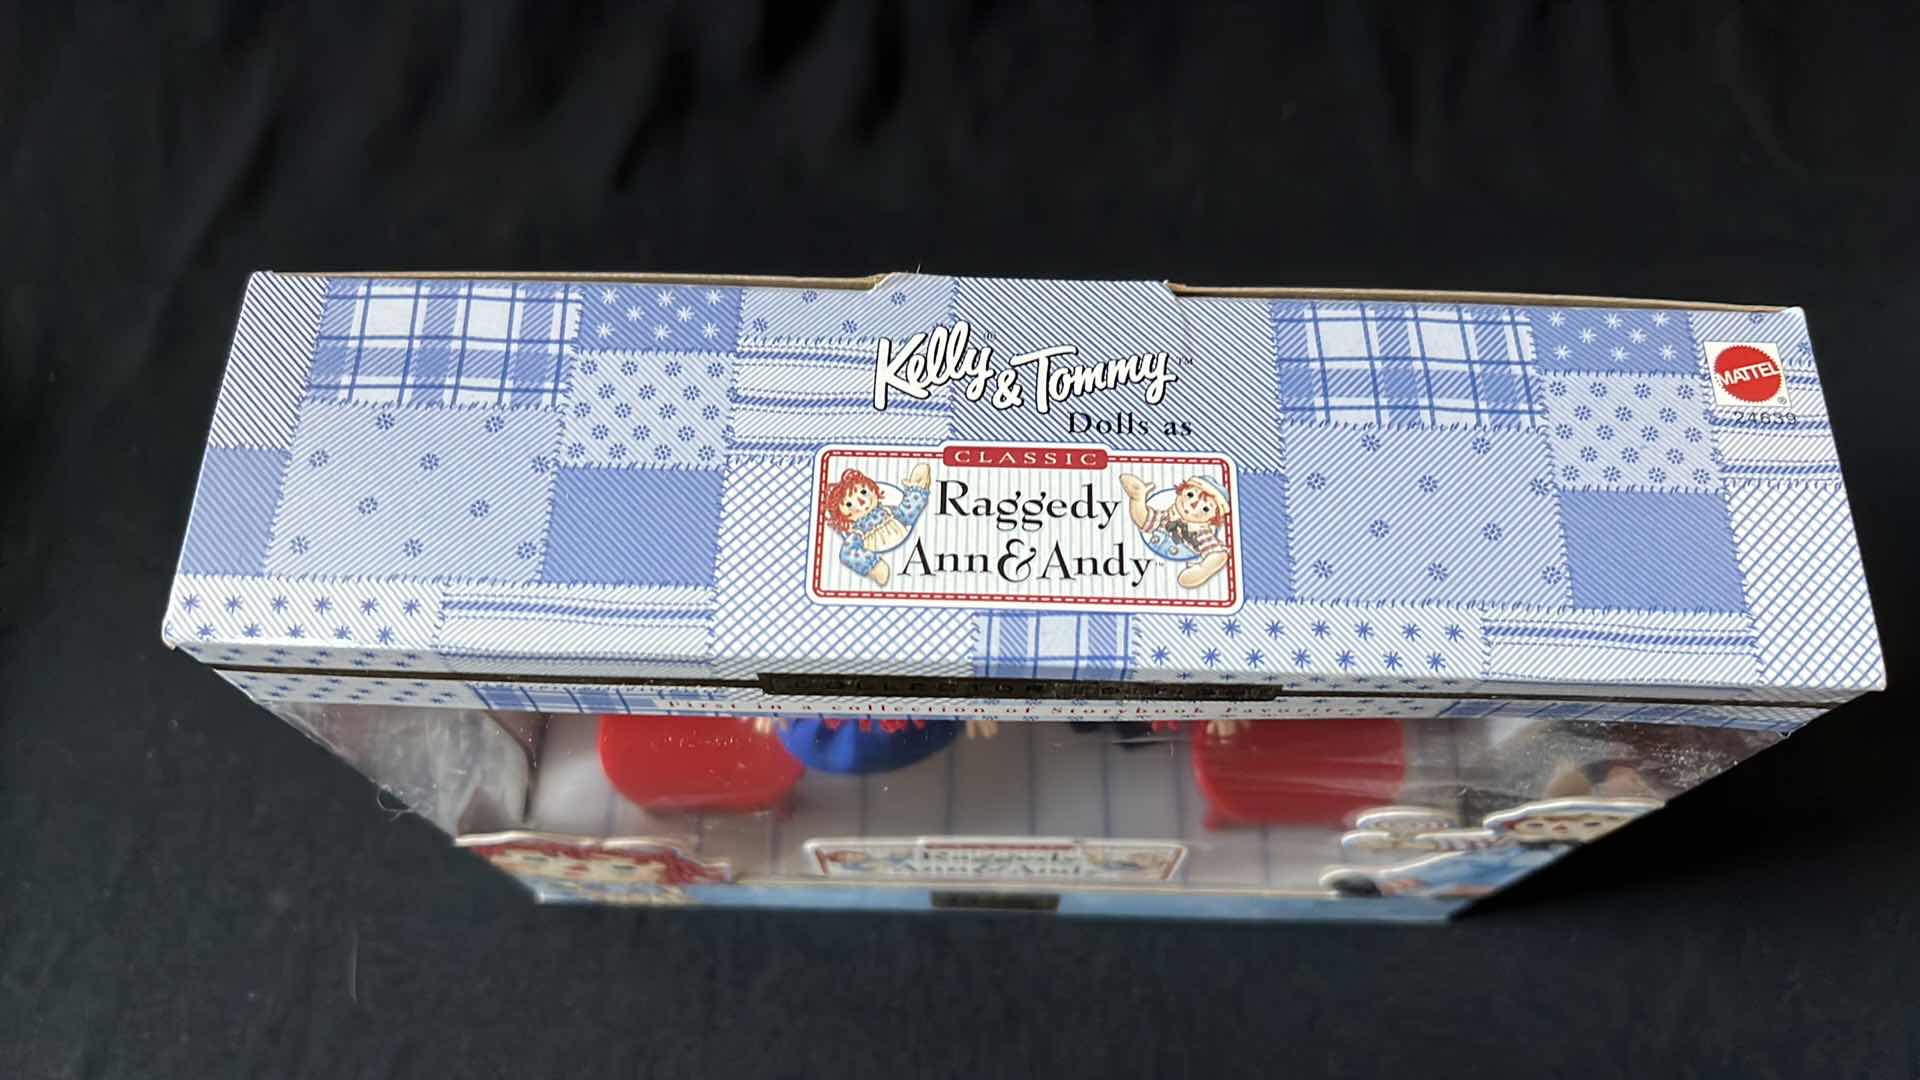 Photo 2 of MATTEL KELLY & TOMMY CLASSIC BARBIE COLLECTIBLES RAGGEDY ANN & ANDY DOLL SET 1999 (24639)